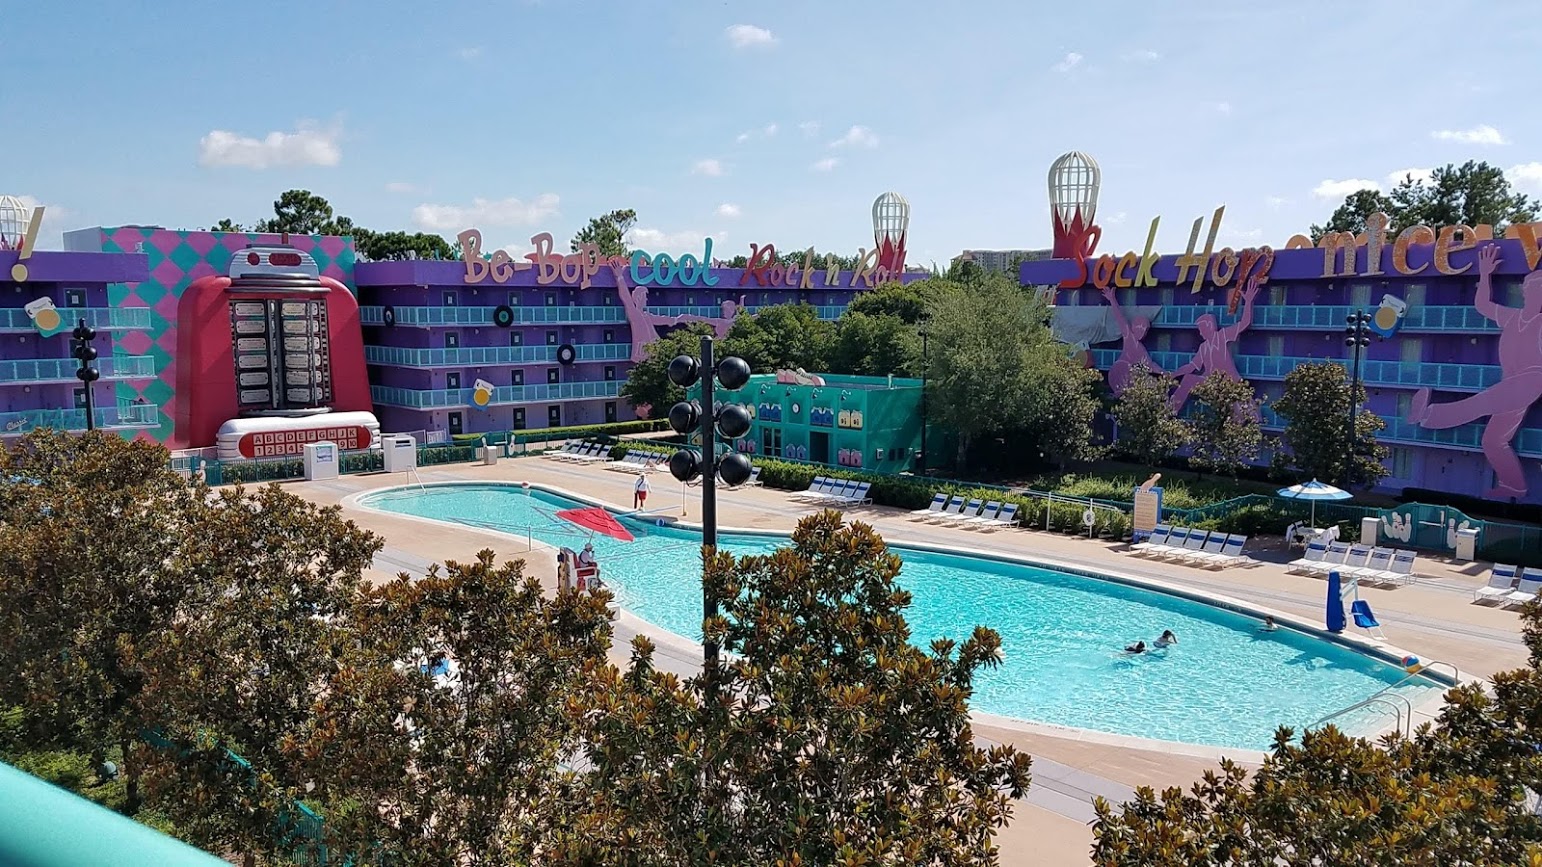 Save Up to 20% On Rooms at Select Walt Disney World Resort Hotels Now Through Spring